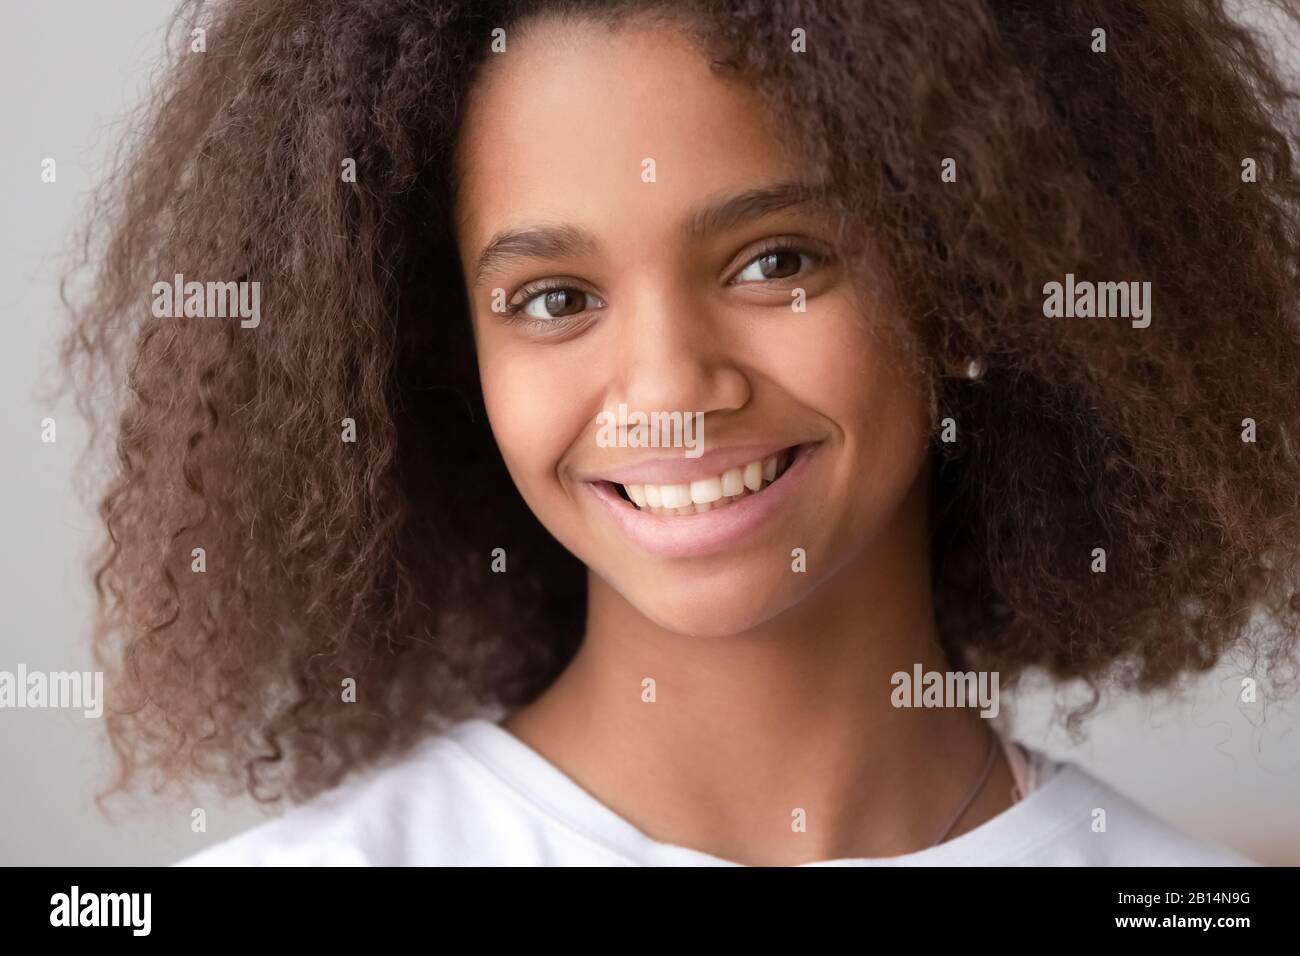 Headshot portrait of african american teen girl looking at camera Stock Photo